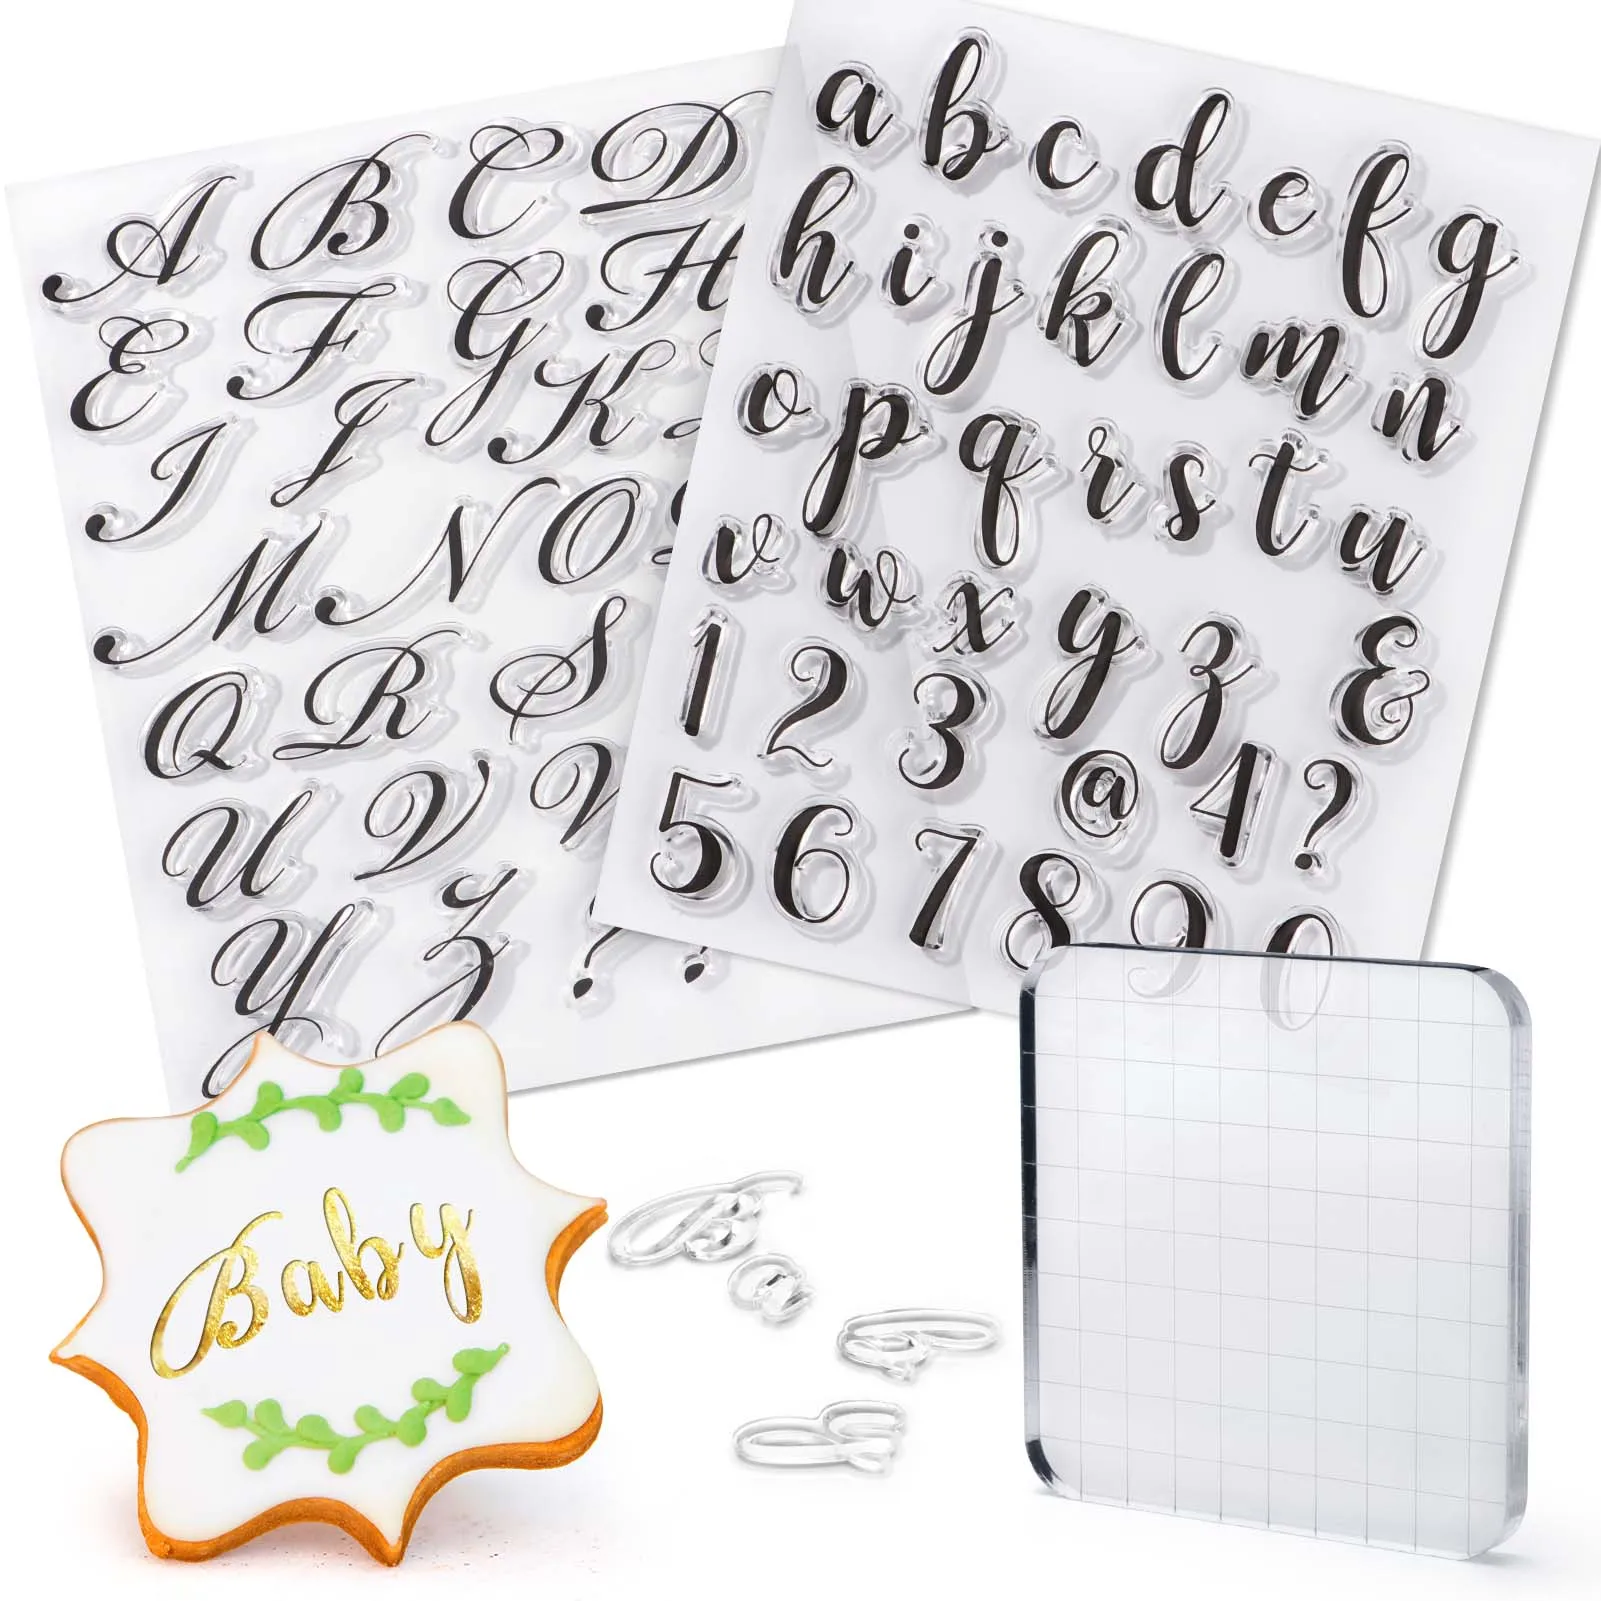 

26 Letter Case Alphabet Letter Number Cookie Biscuit Stamp Mold Cookie Cutters And Stamps Embosser Diy Fondant Cake Baking Mould